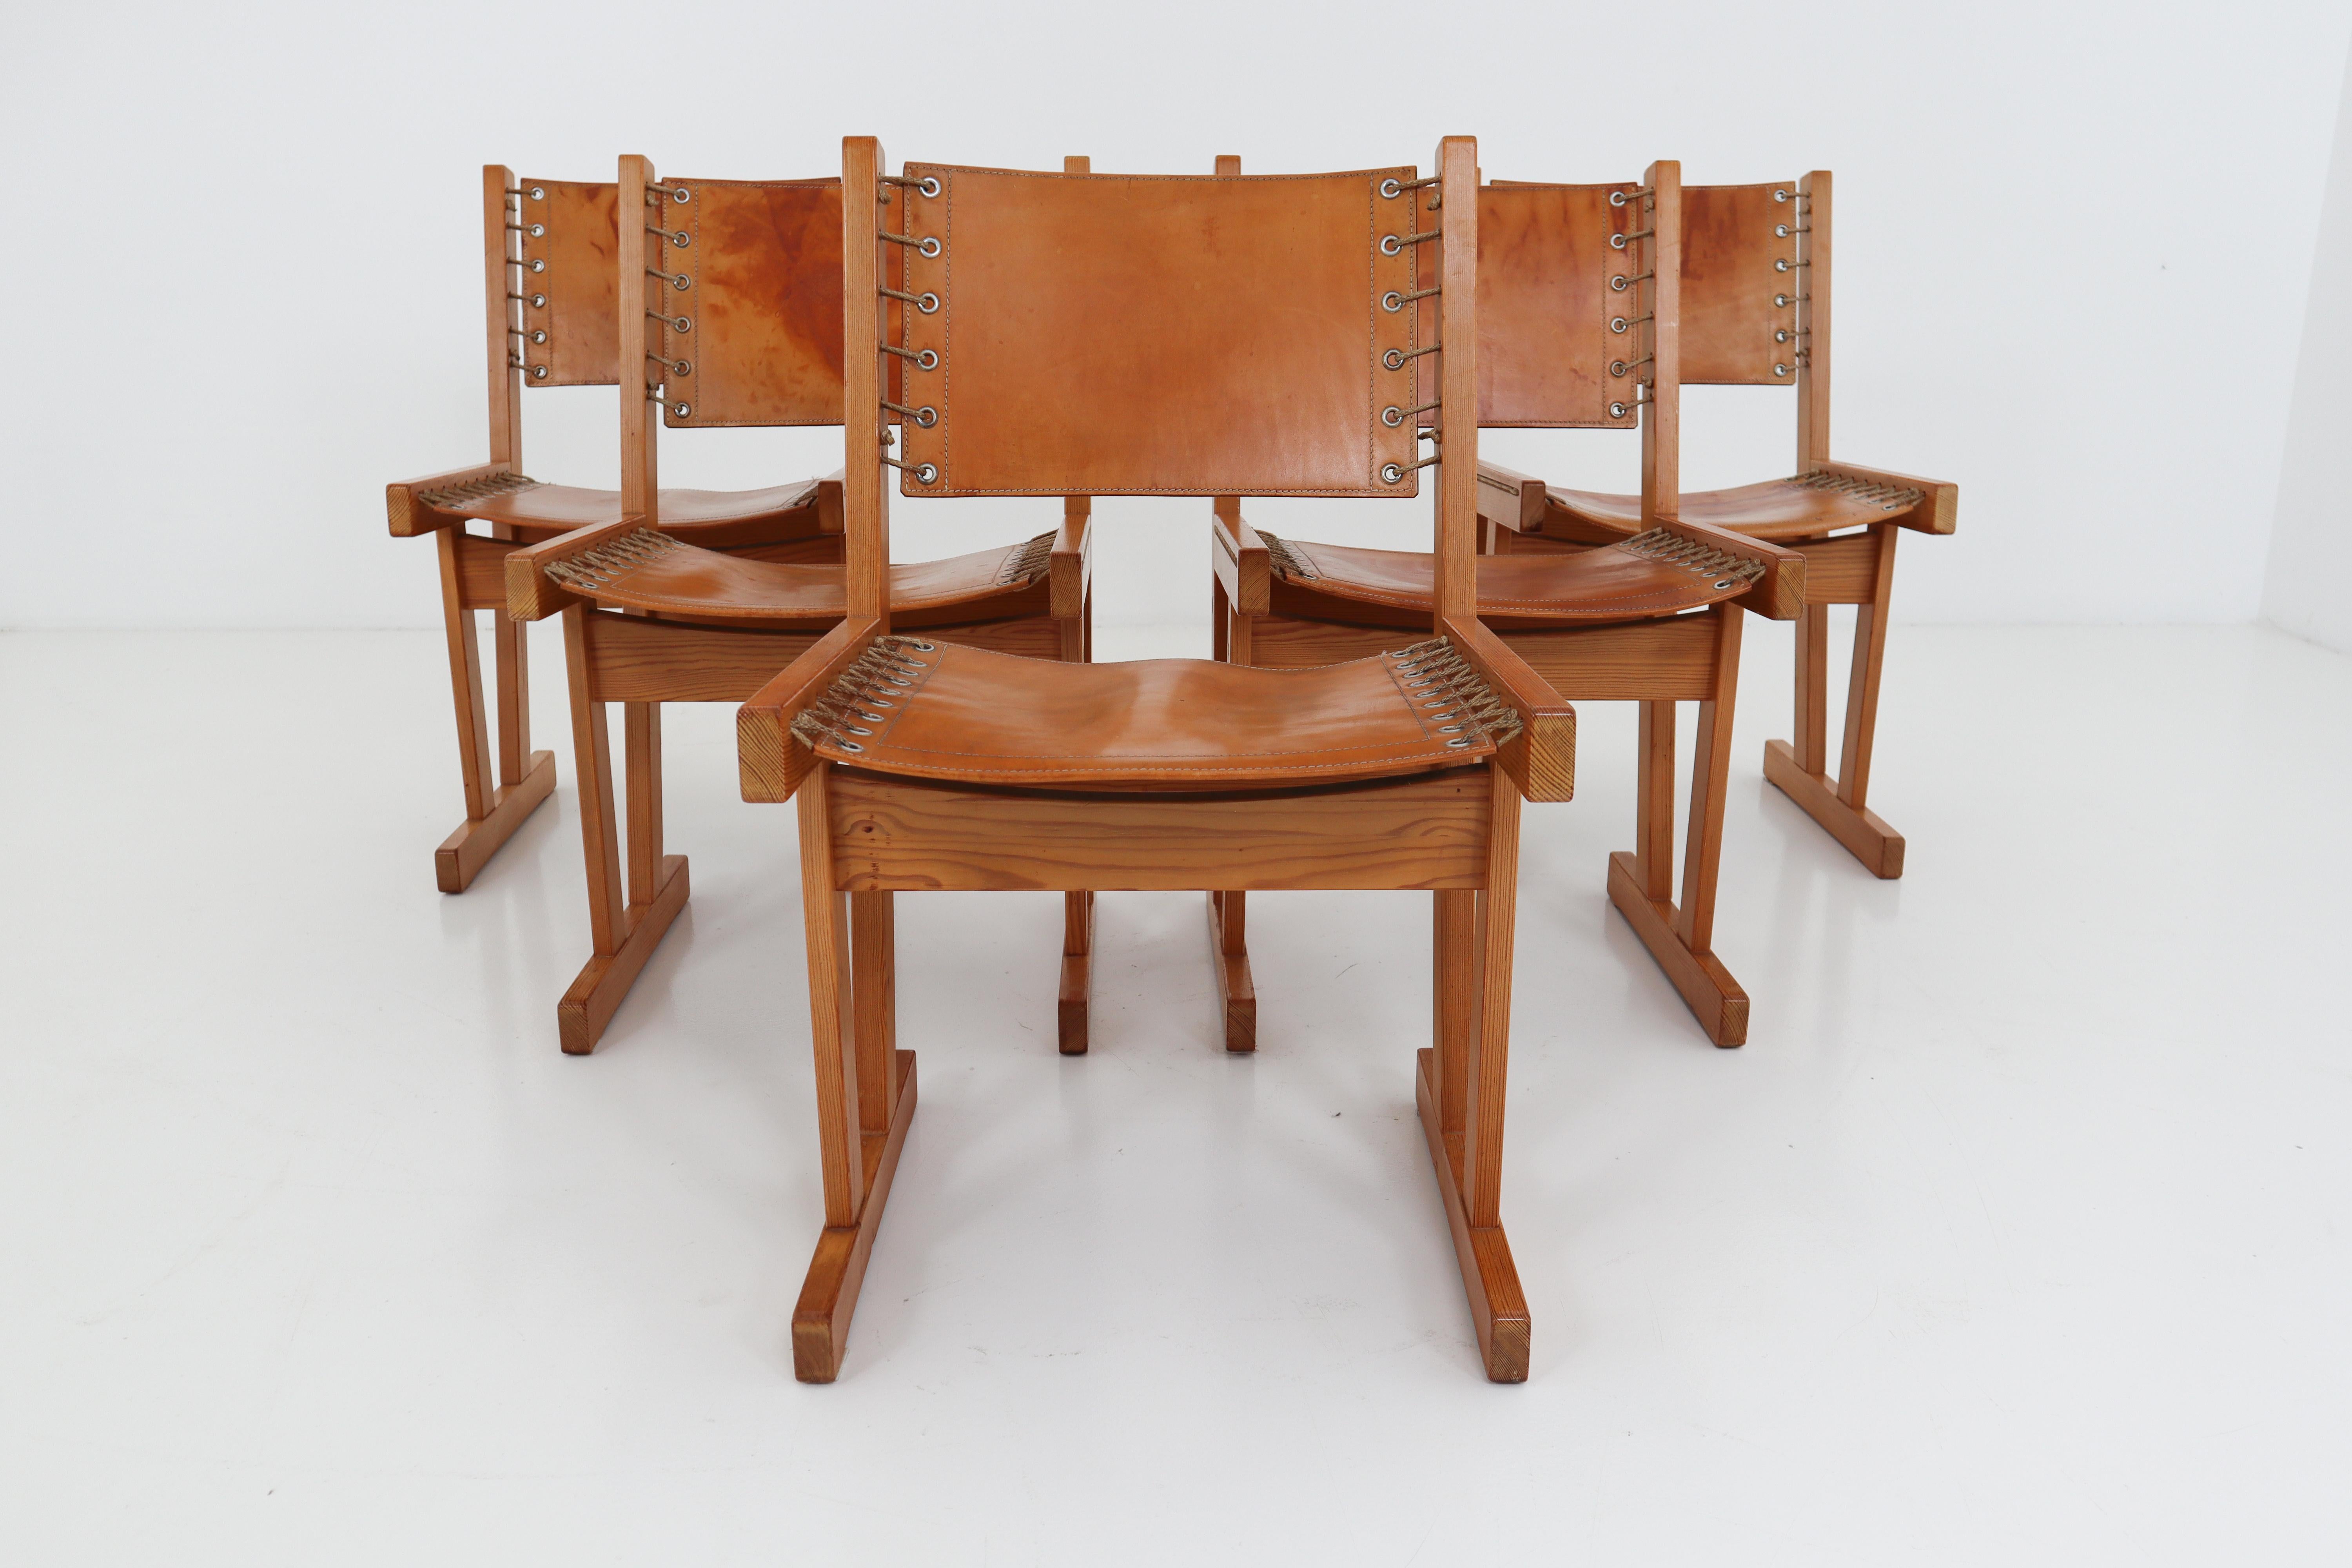 Set of five safari chairs in absolutely gorgeous thick cognac saddle leather and solid pinewood, circa 1970s. Chairs are in very good condition with incredible patina and natural wear to the leather adds tons of character.